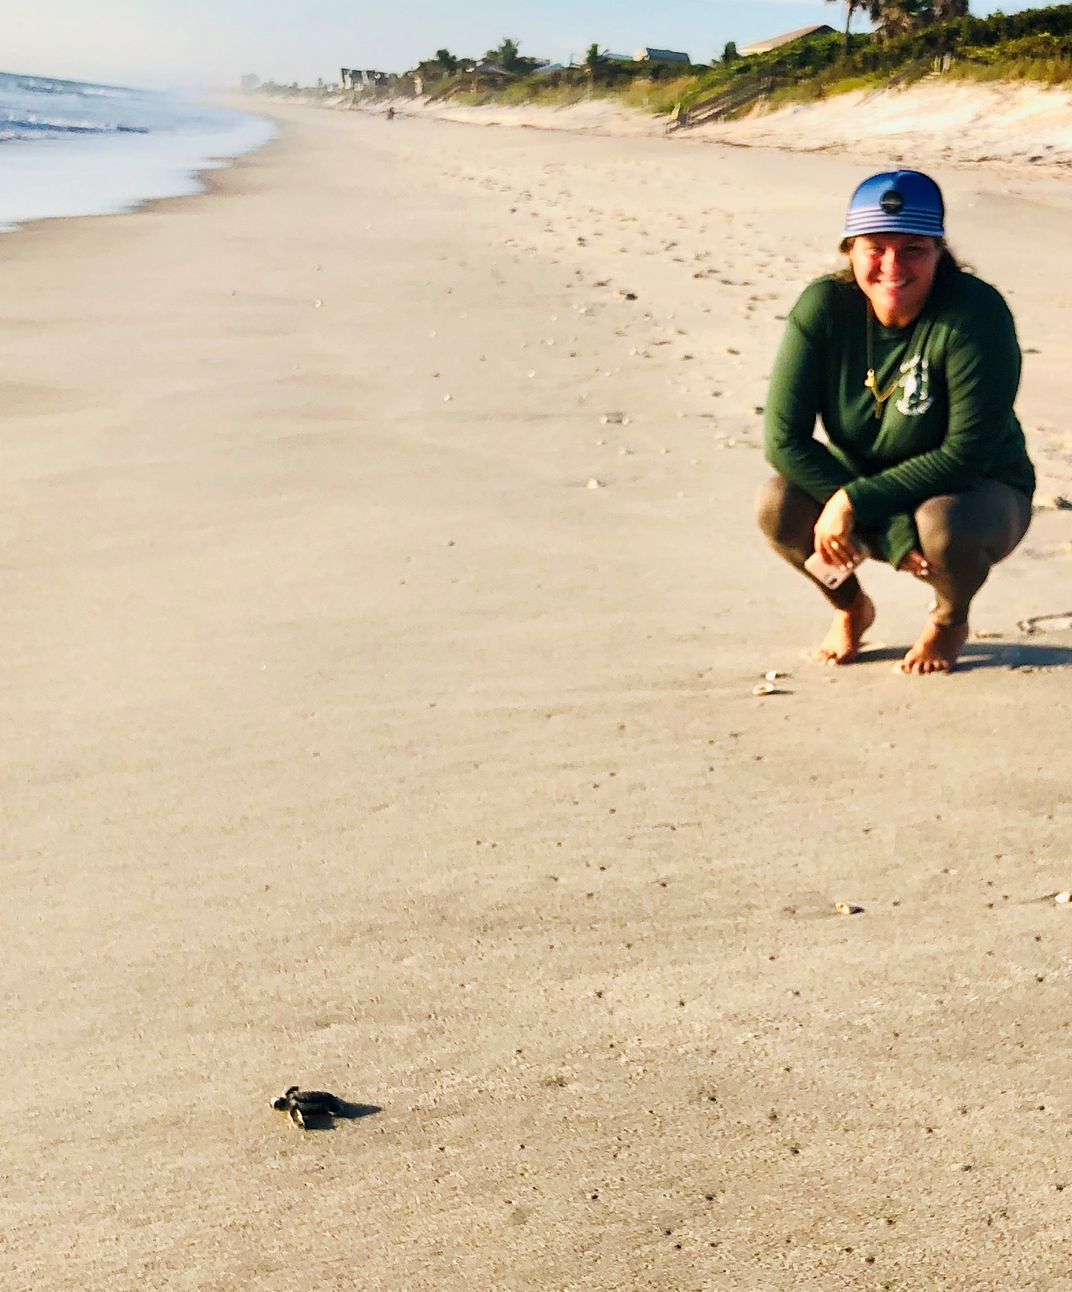 A person on a beach with a baby sea turtle.